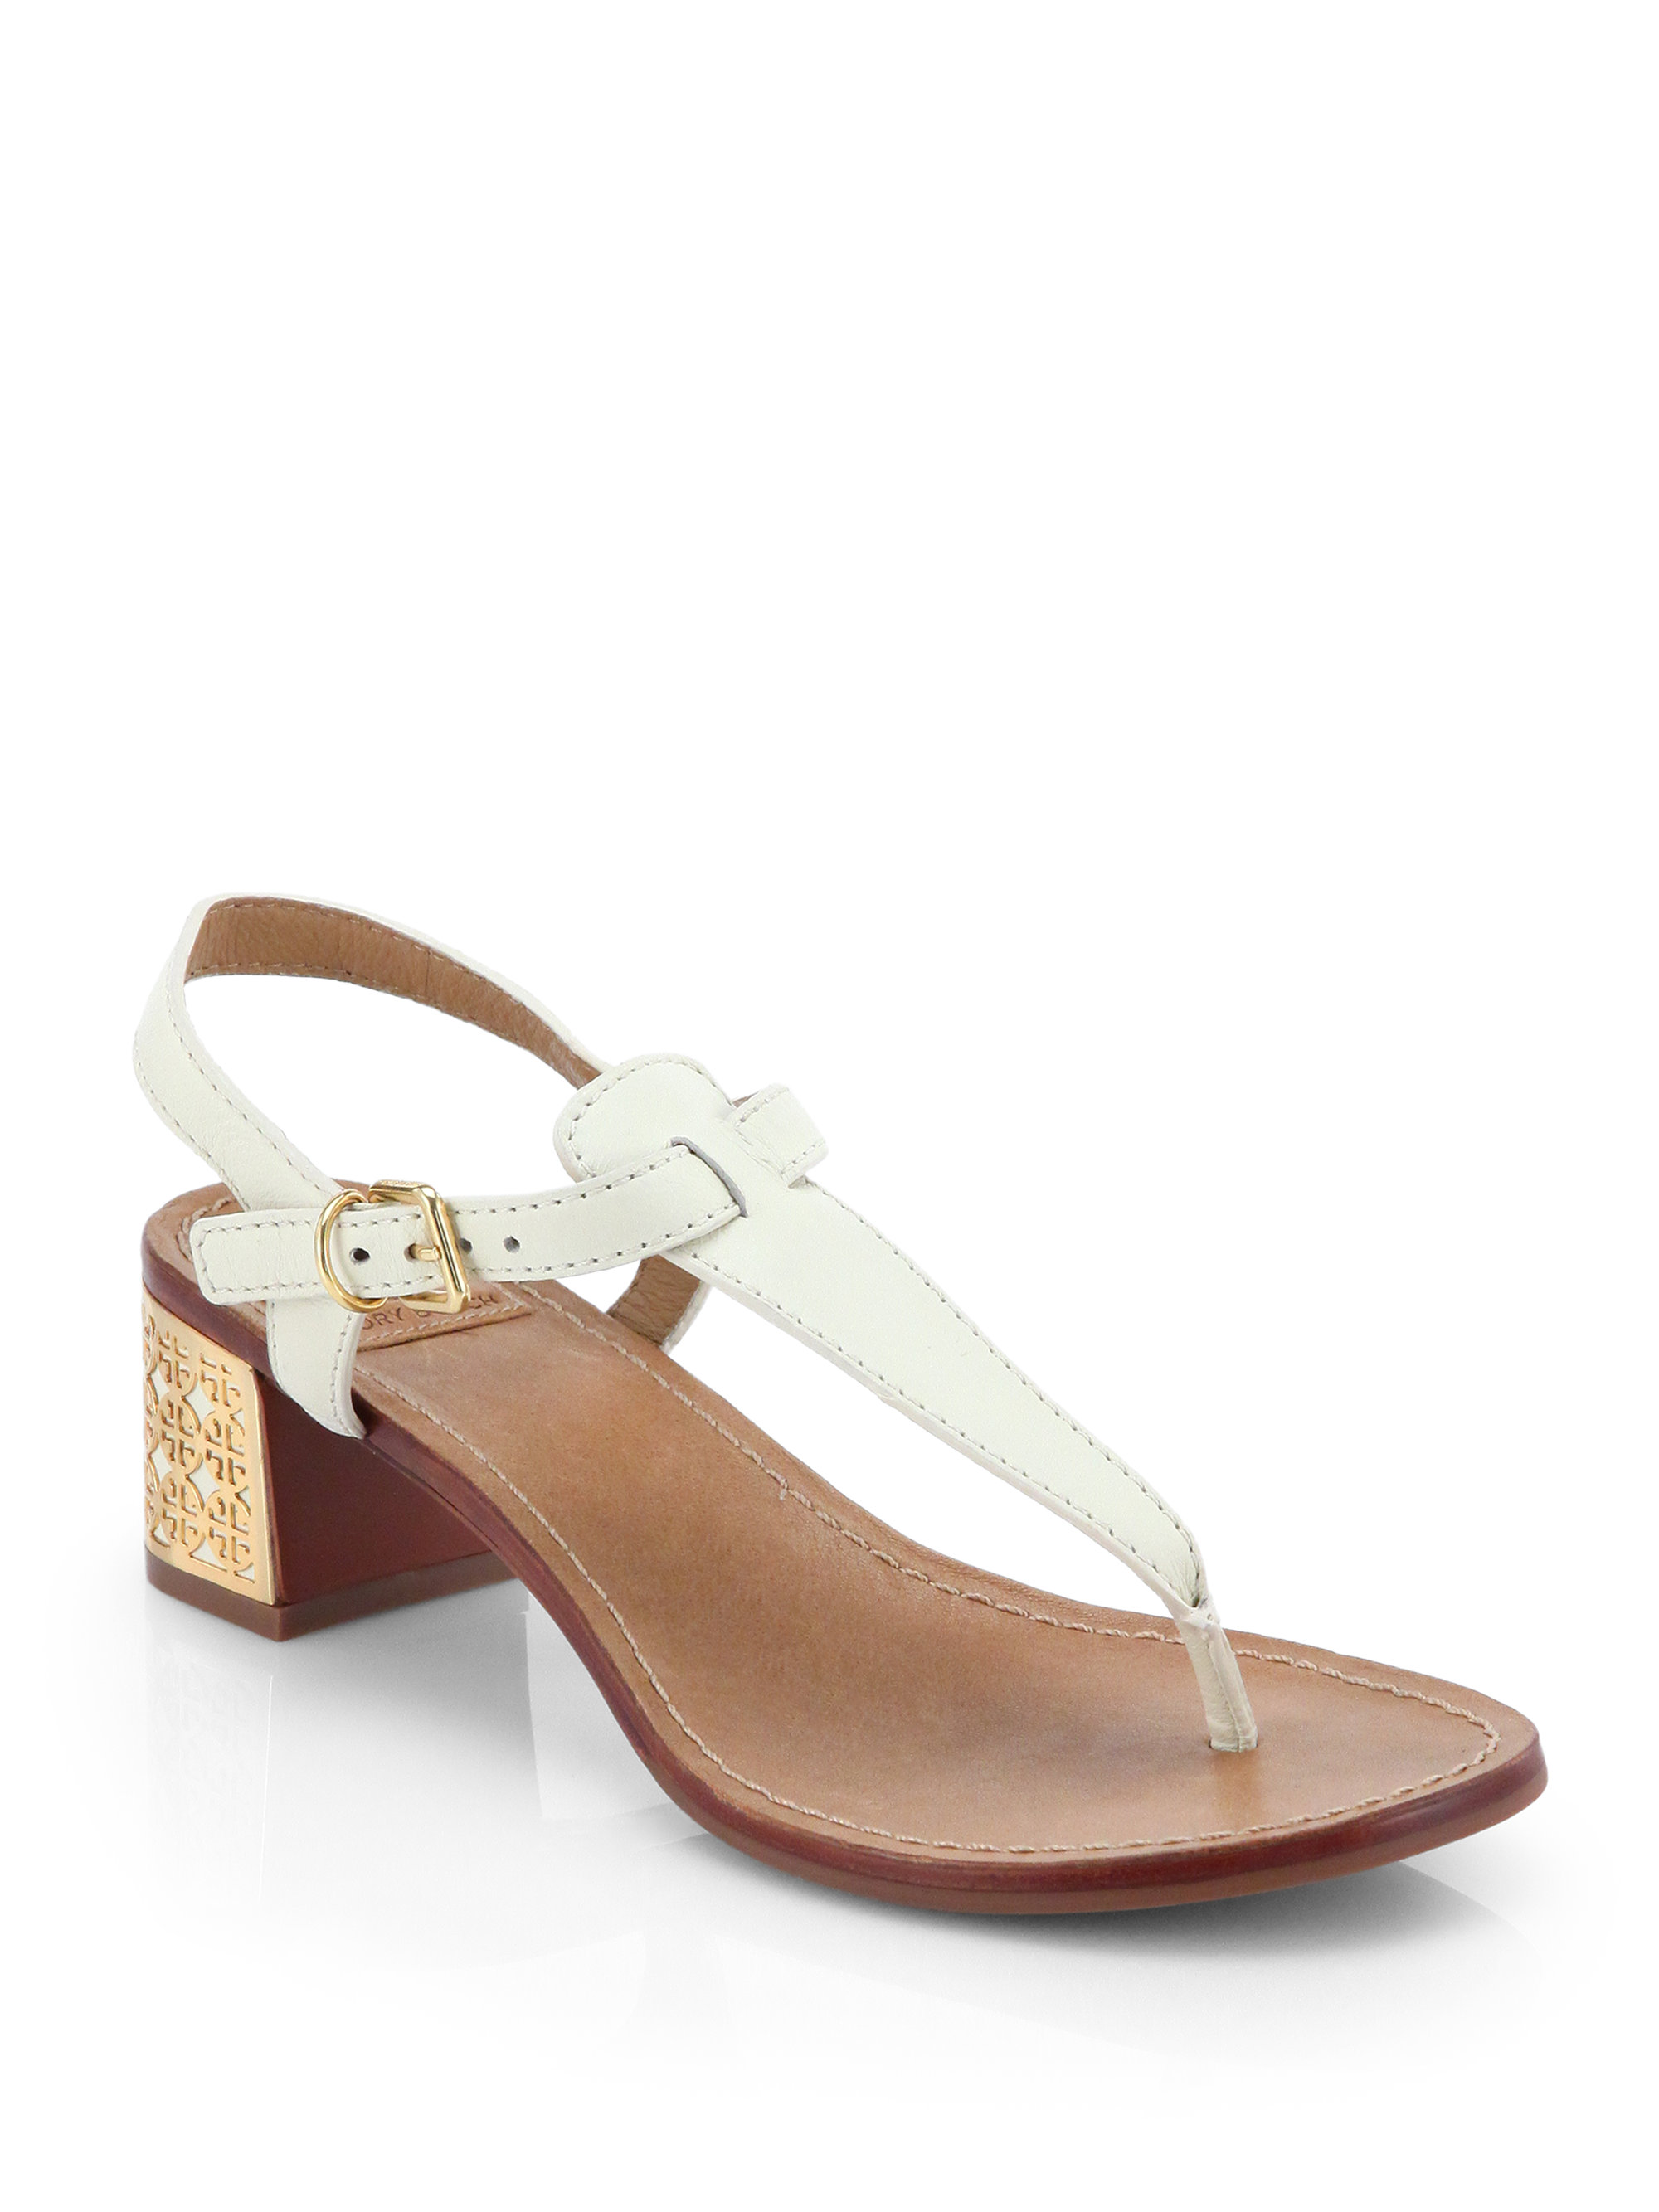 Lyst - Tory Burch Audra Logo Heel Leather Sandals in Natural